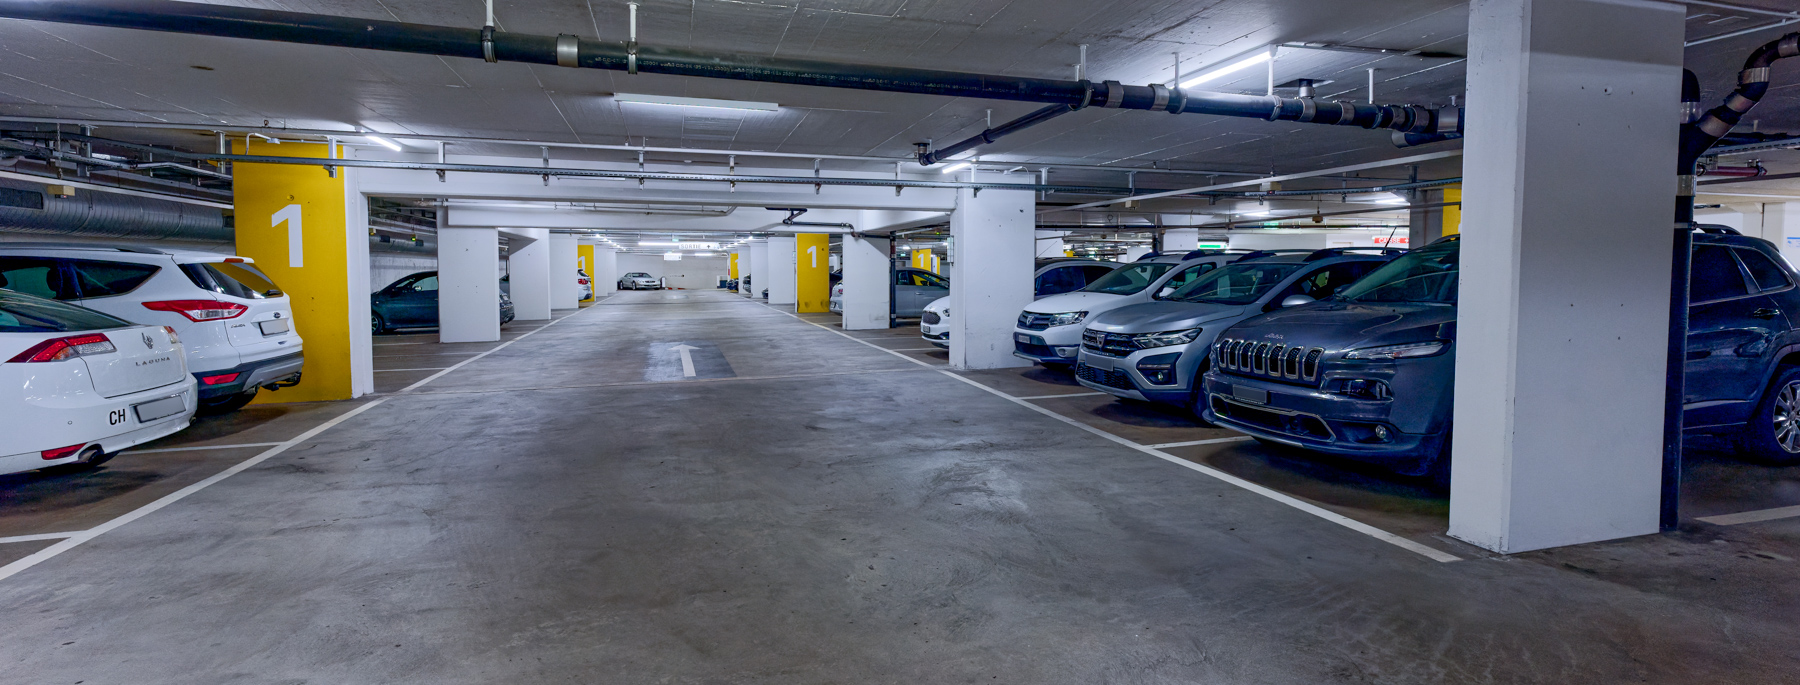 Parking Pully Centre